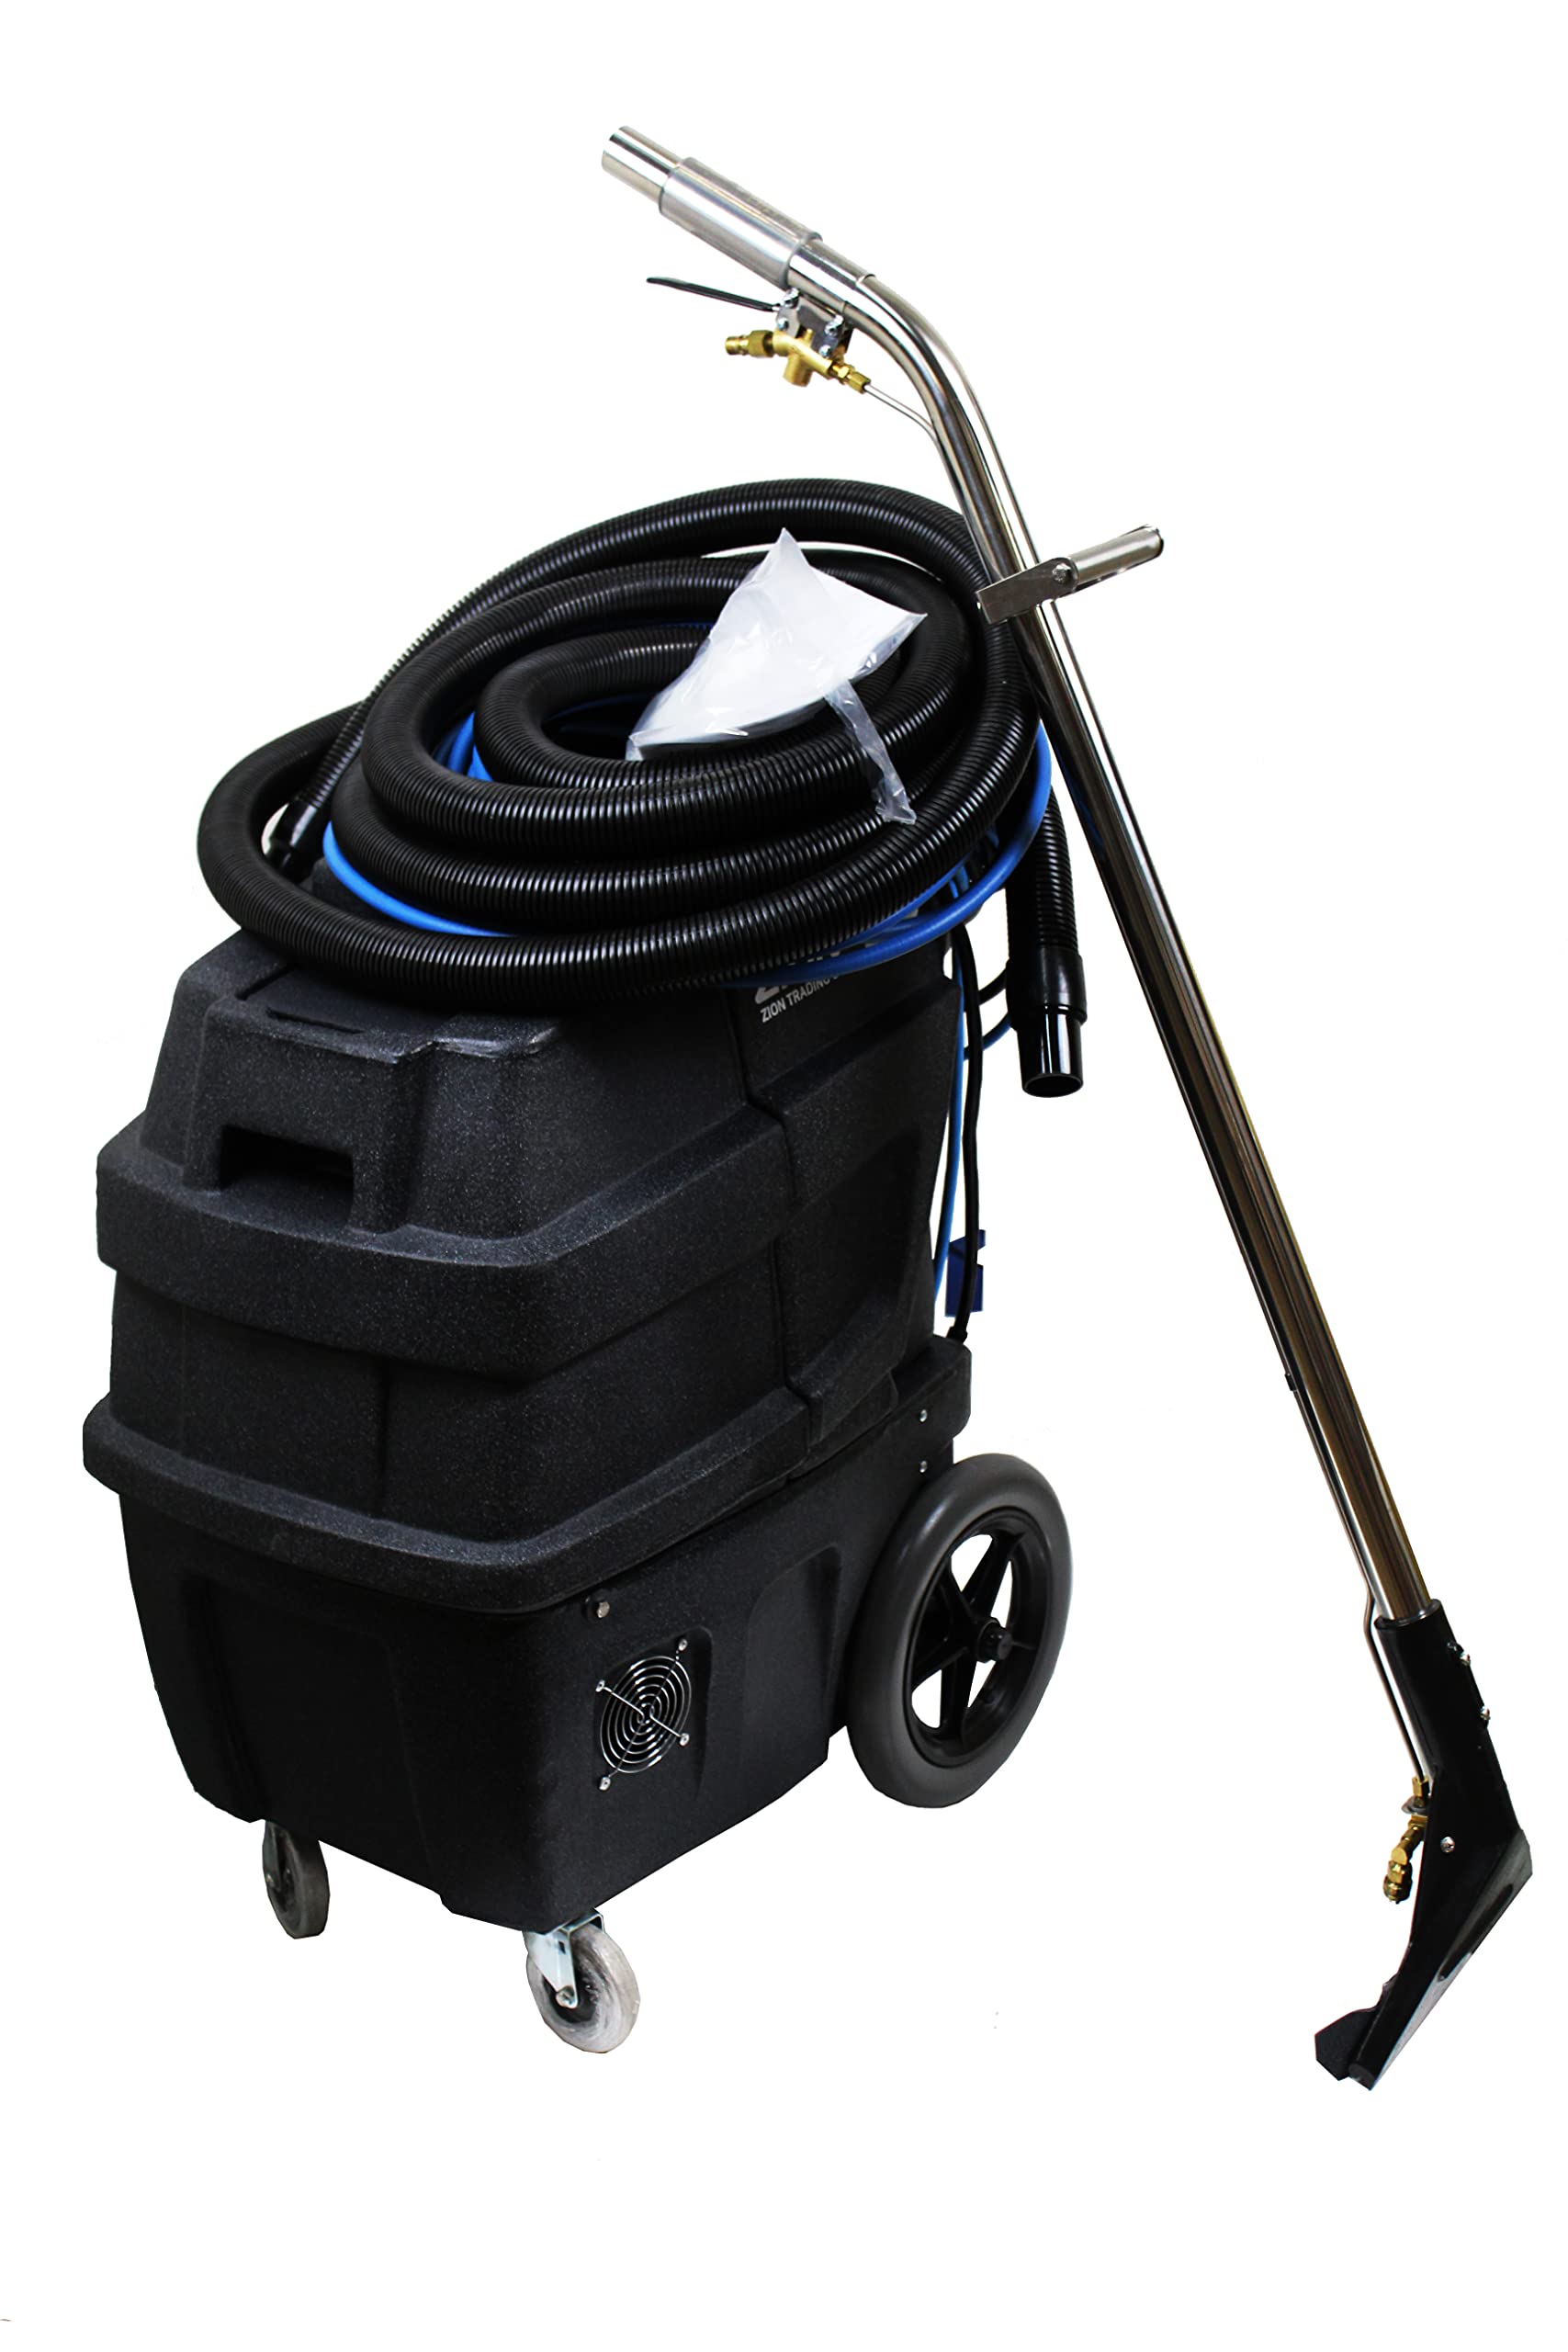 ZION 500 psi Rhino Carpet Extractor Wand and Hose included!, 36 inch x 21 inch x 28 inch (RH-3500-XG)